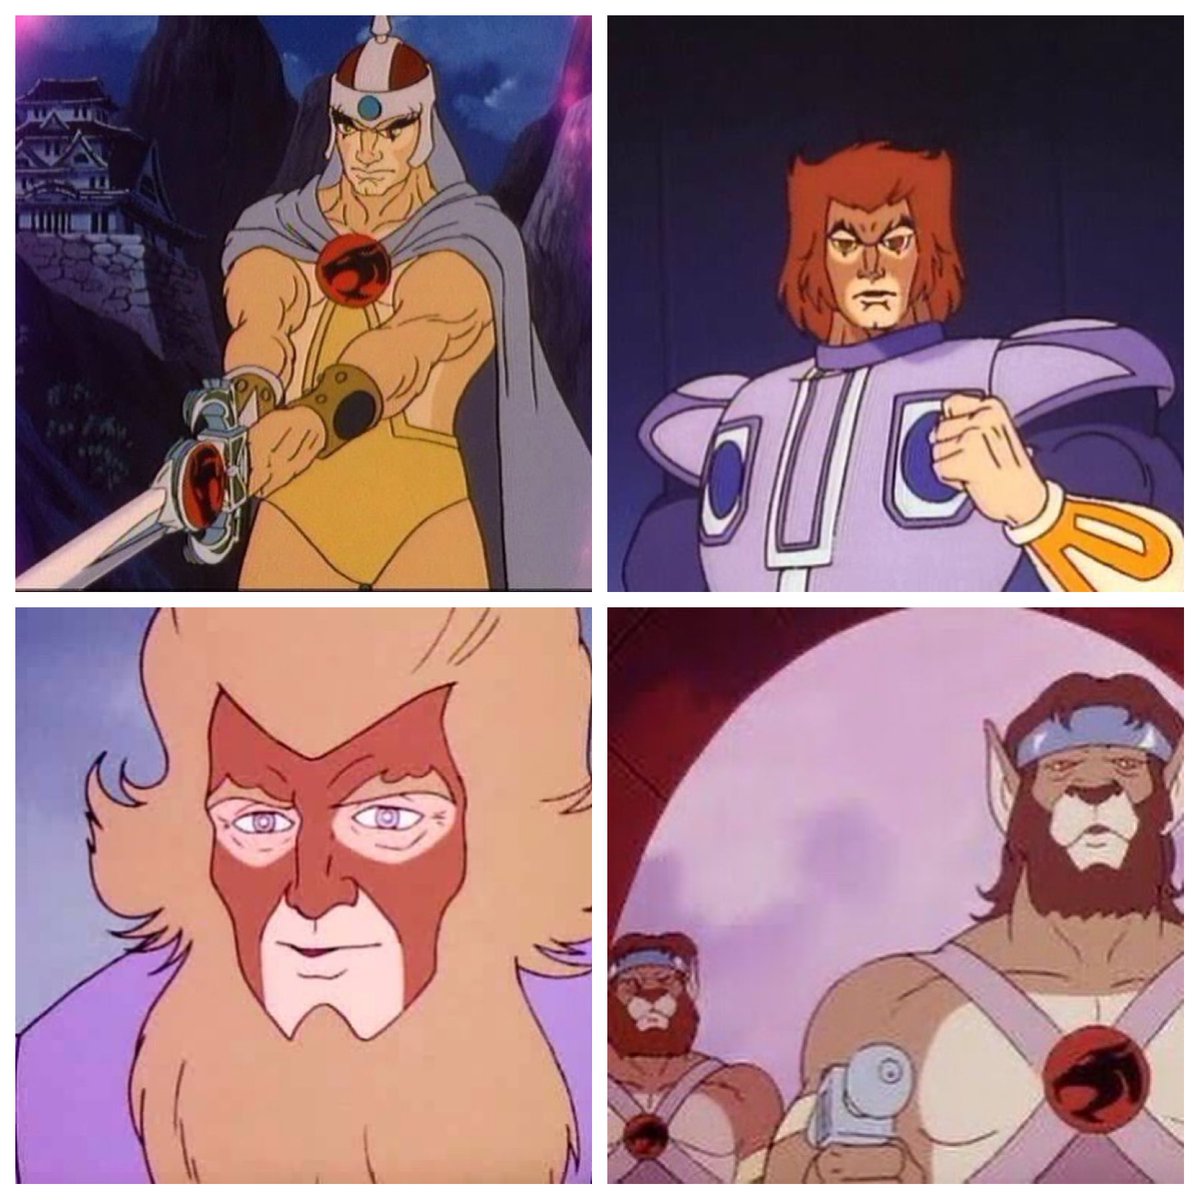 Actual #thundercats that have never been made in toy form I wanna see from the #super7ultimates line. 
1) Jagara
2) Young Lion-O (throw in a baby version)
3) Claudus (with a young alt head!) 
4) Thunderian Guards
5) Young Jaga (a head pack in?)
6) Wielder of the Totem of Dera